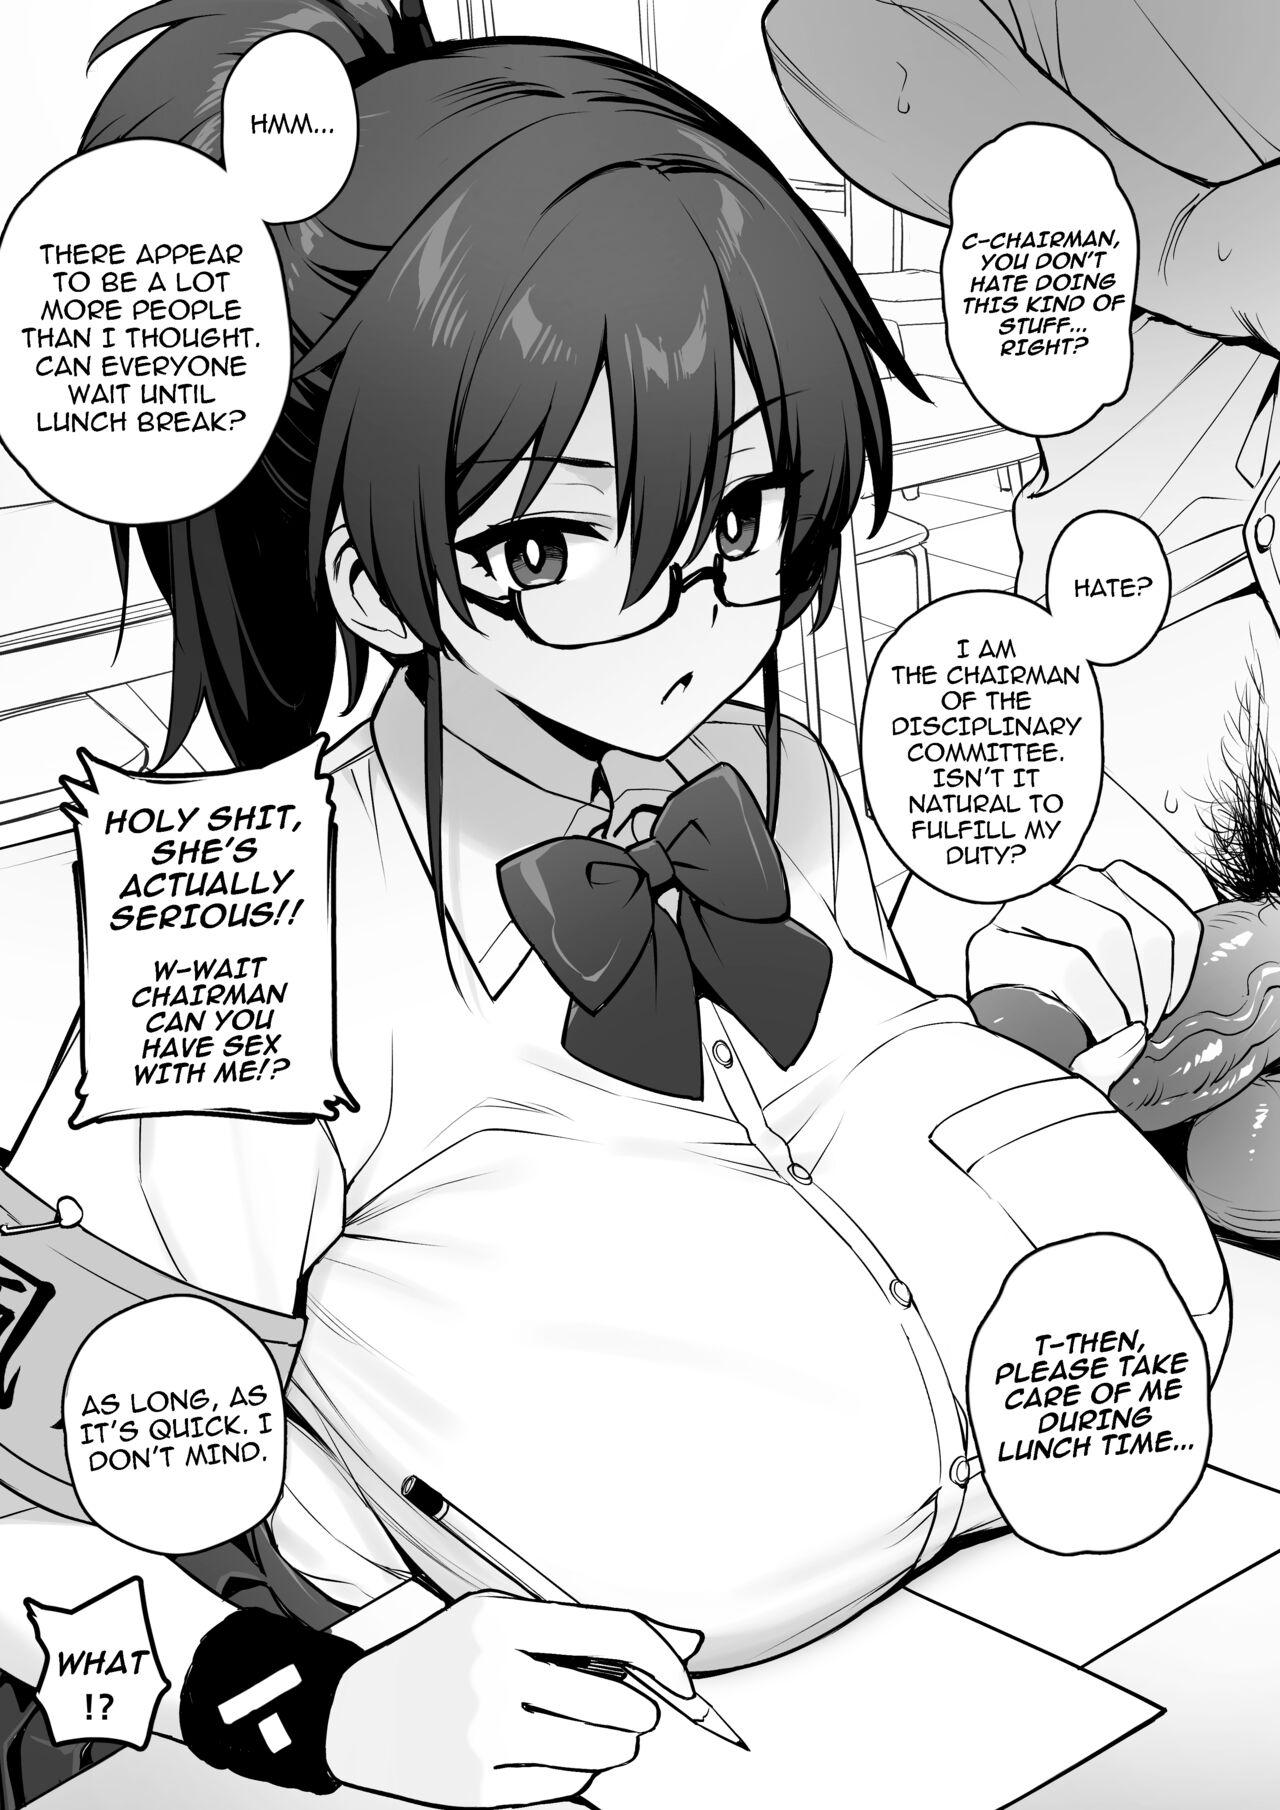 Dick Suck Rumor Has It That The New Chairman of Disciplinary Committee Has Huge Breasts. - Original Naked Sex - Page 8